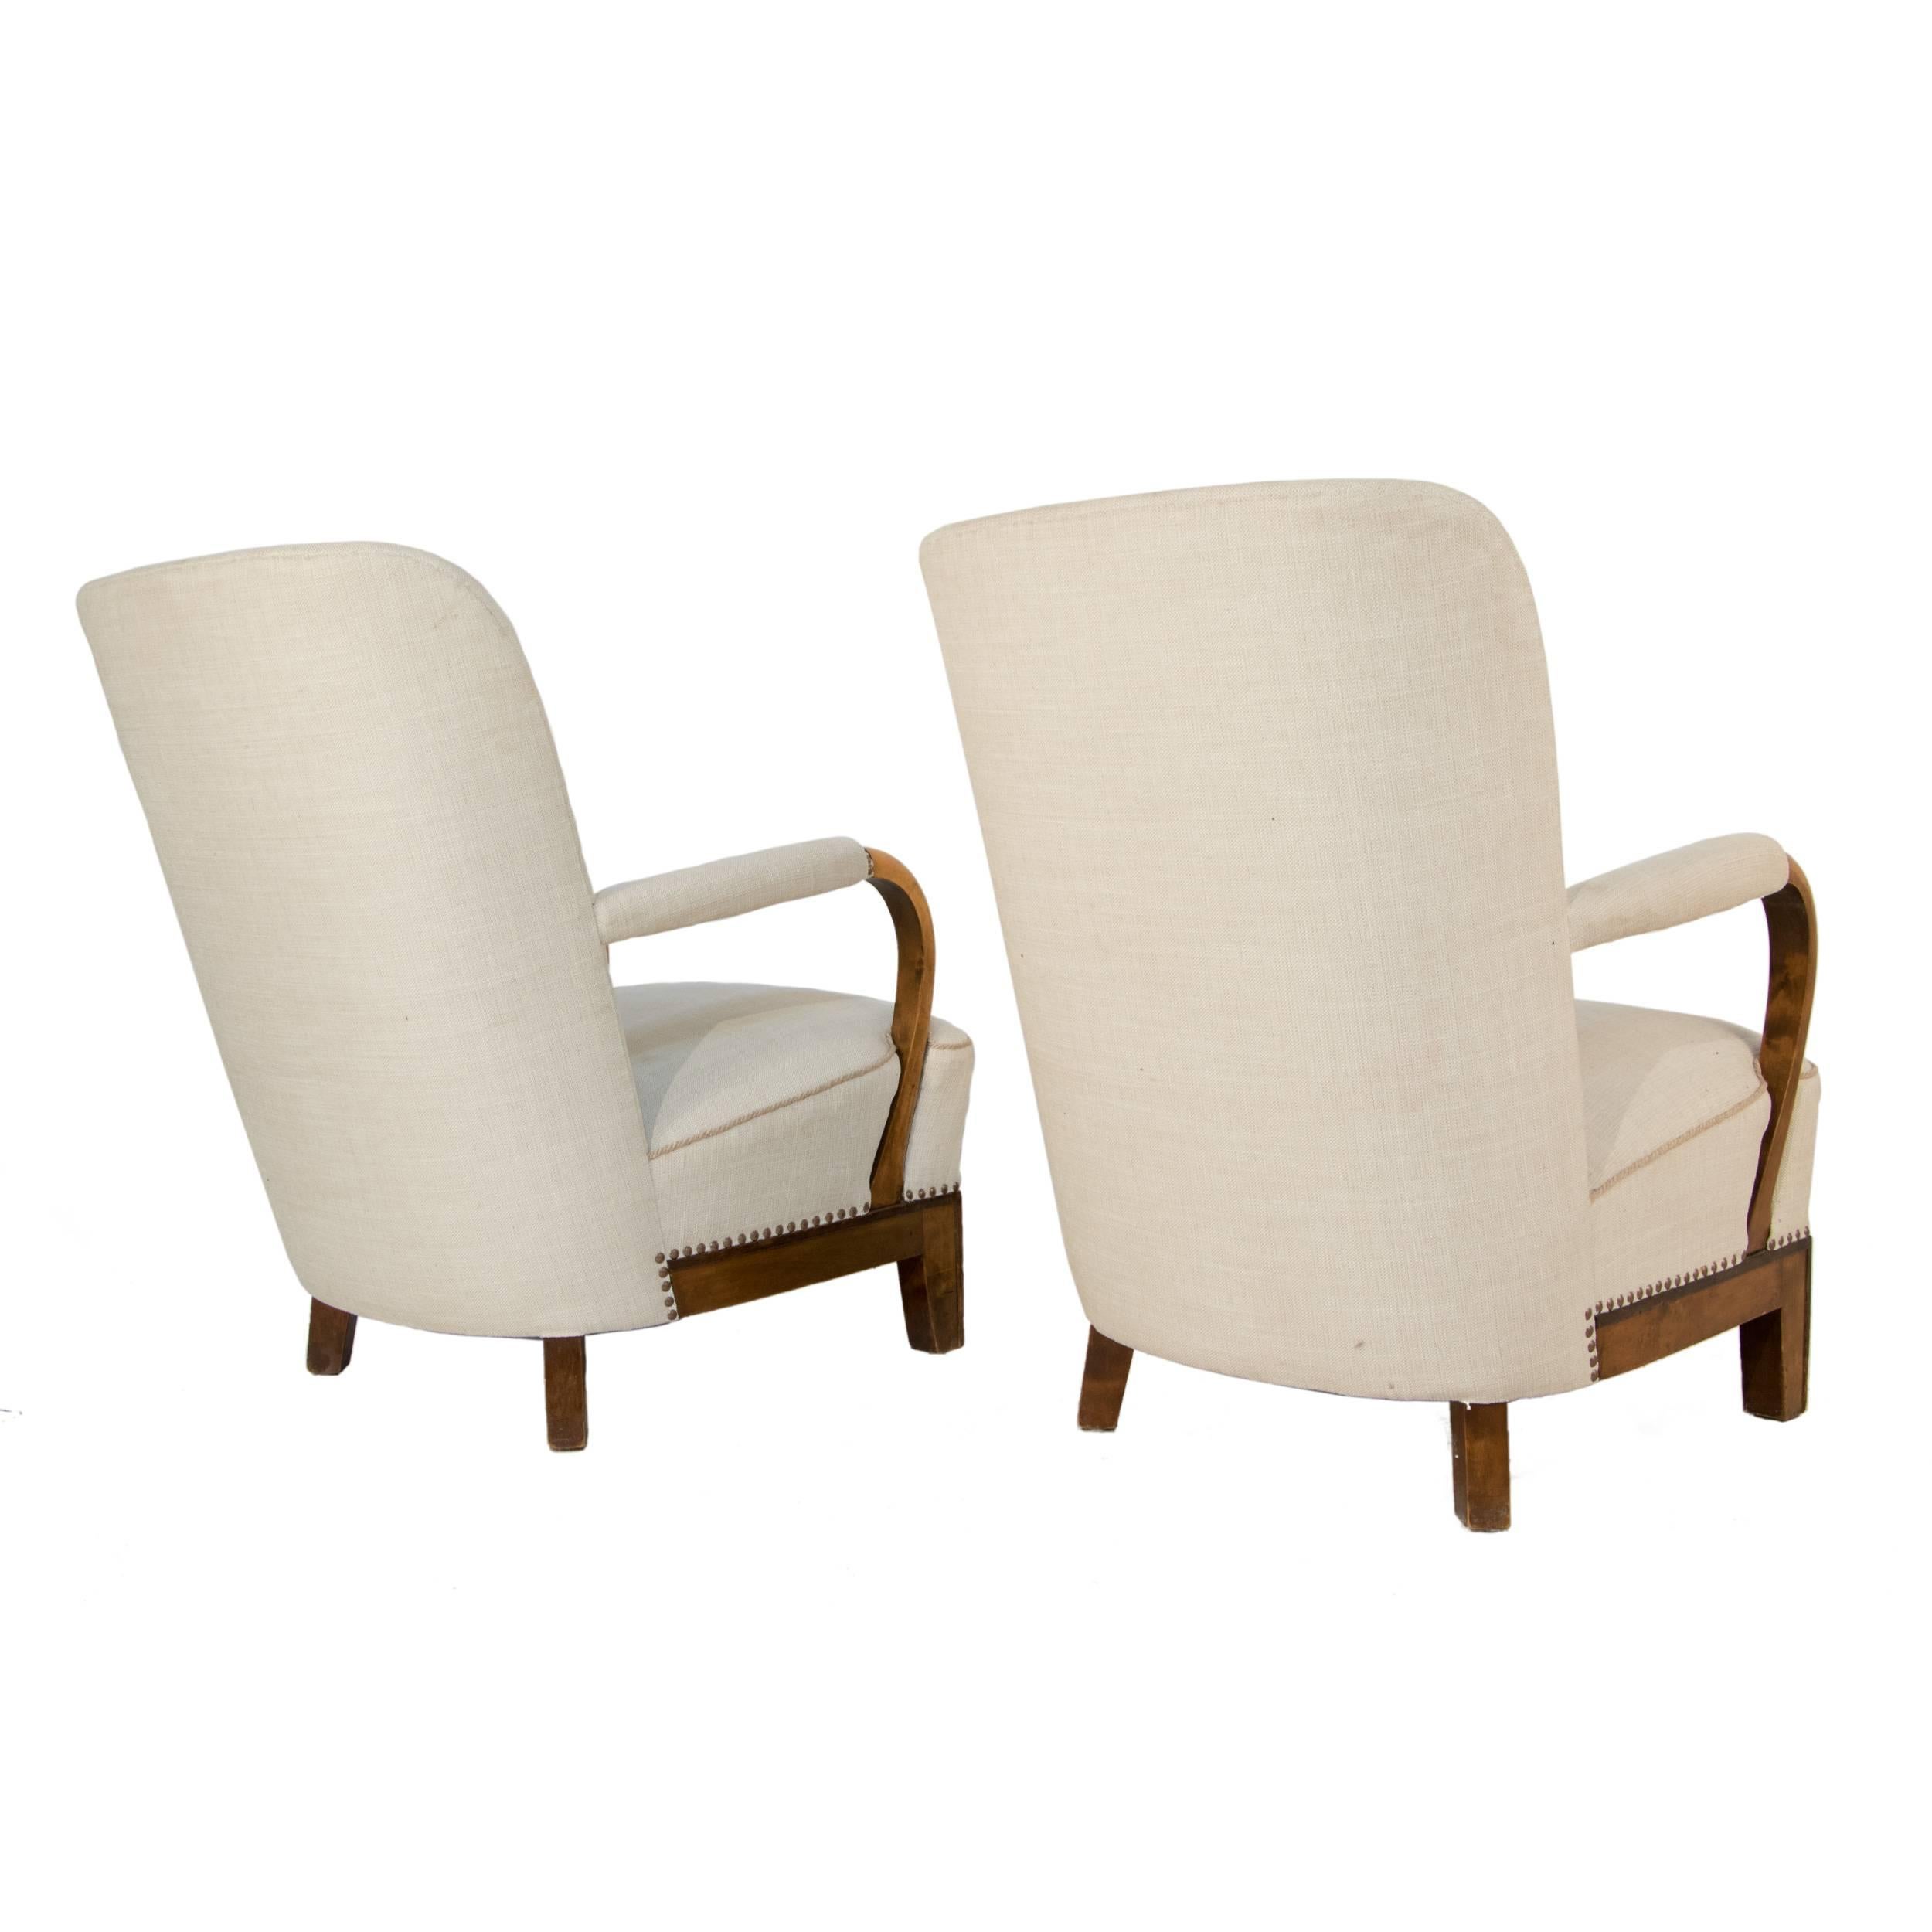 Pair of Swedish Grace Lounge Chairs In Excellent Condition For Sale In Los Angeles, CA